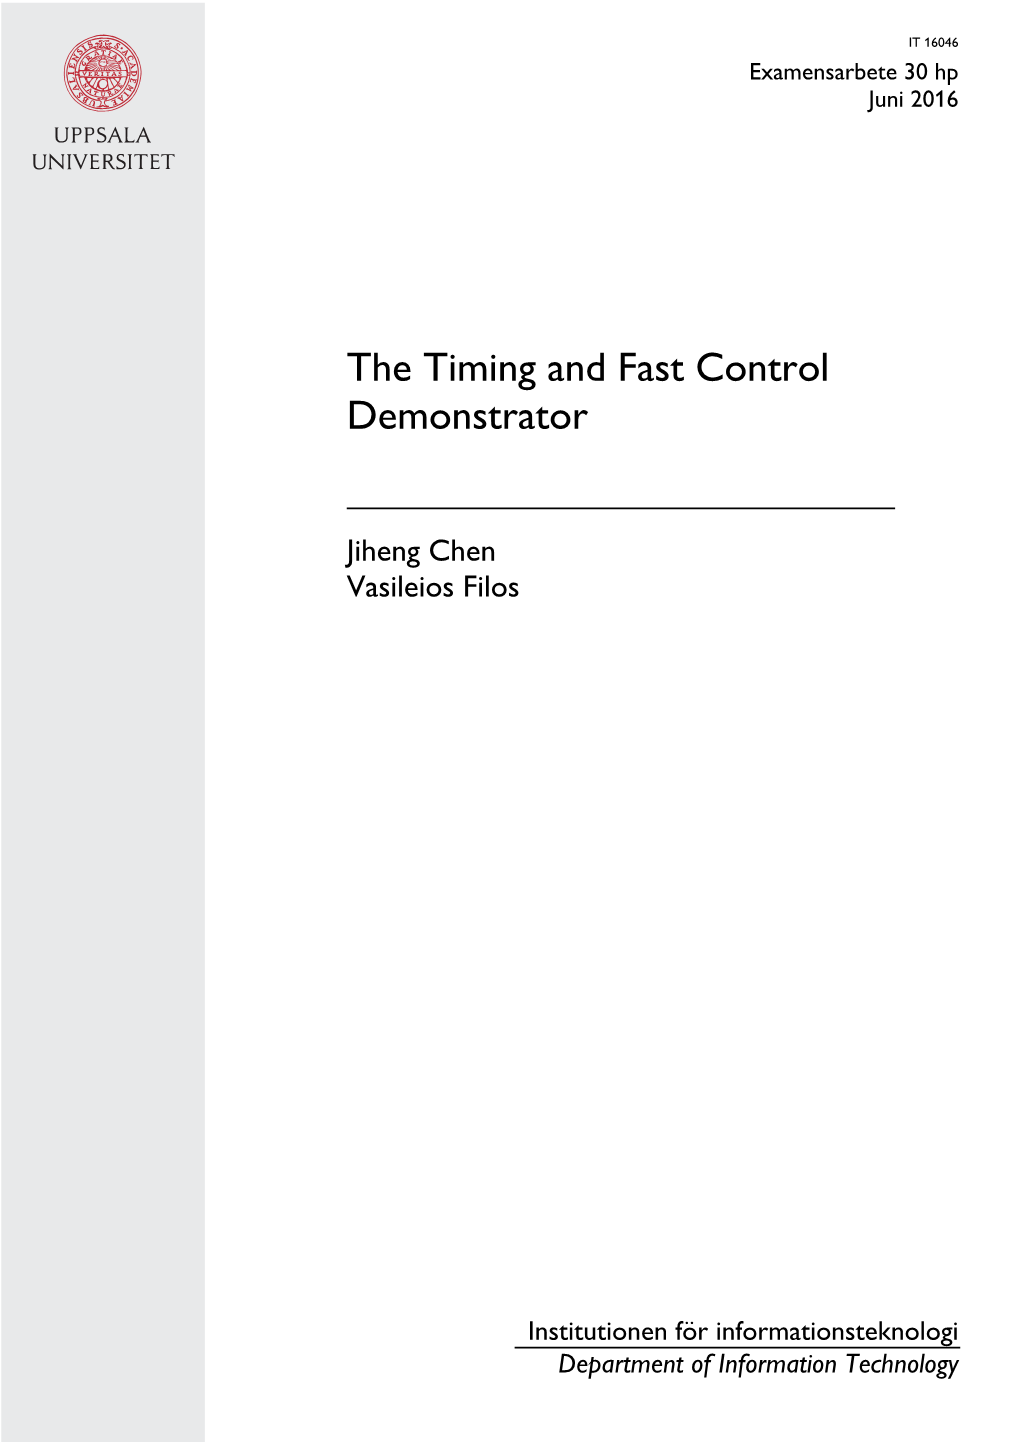 The Timing and Fast Control Demonstrator